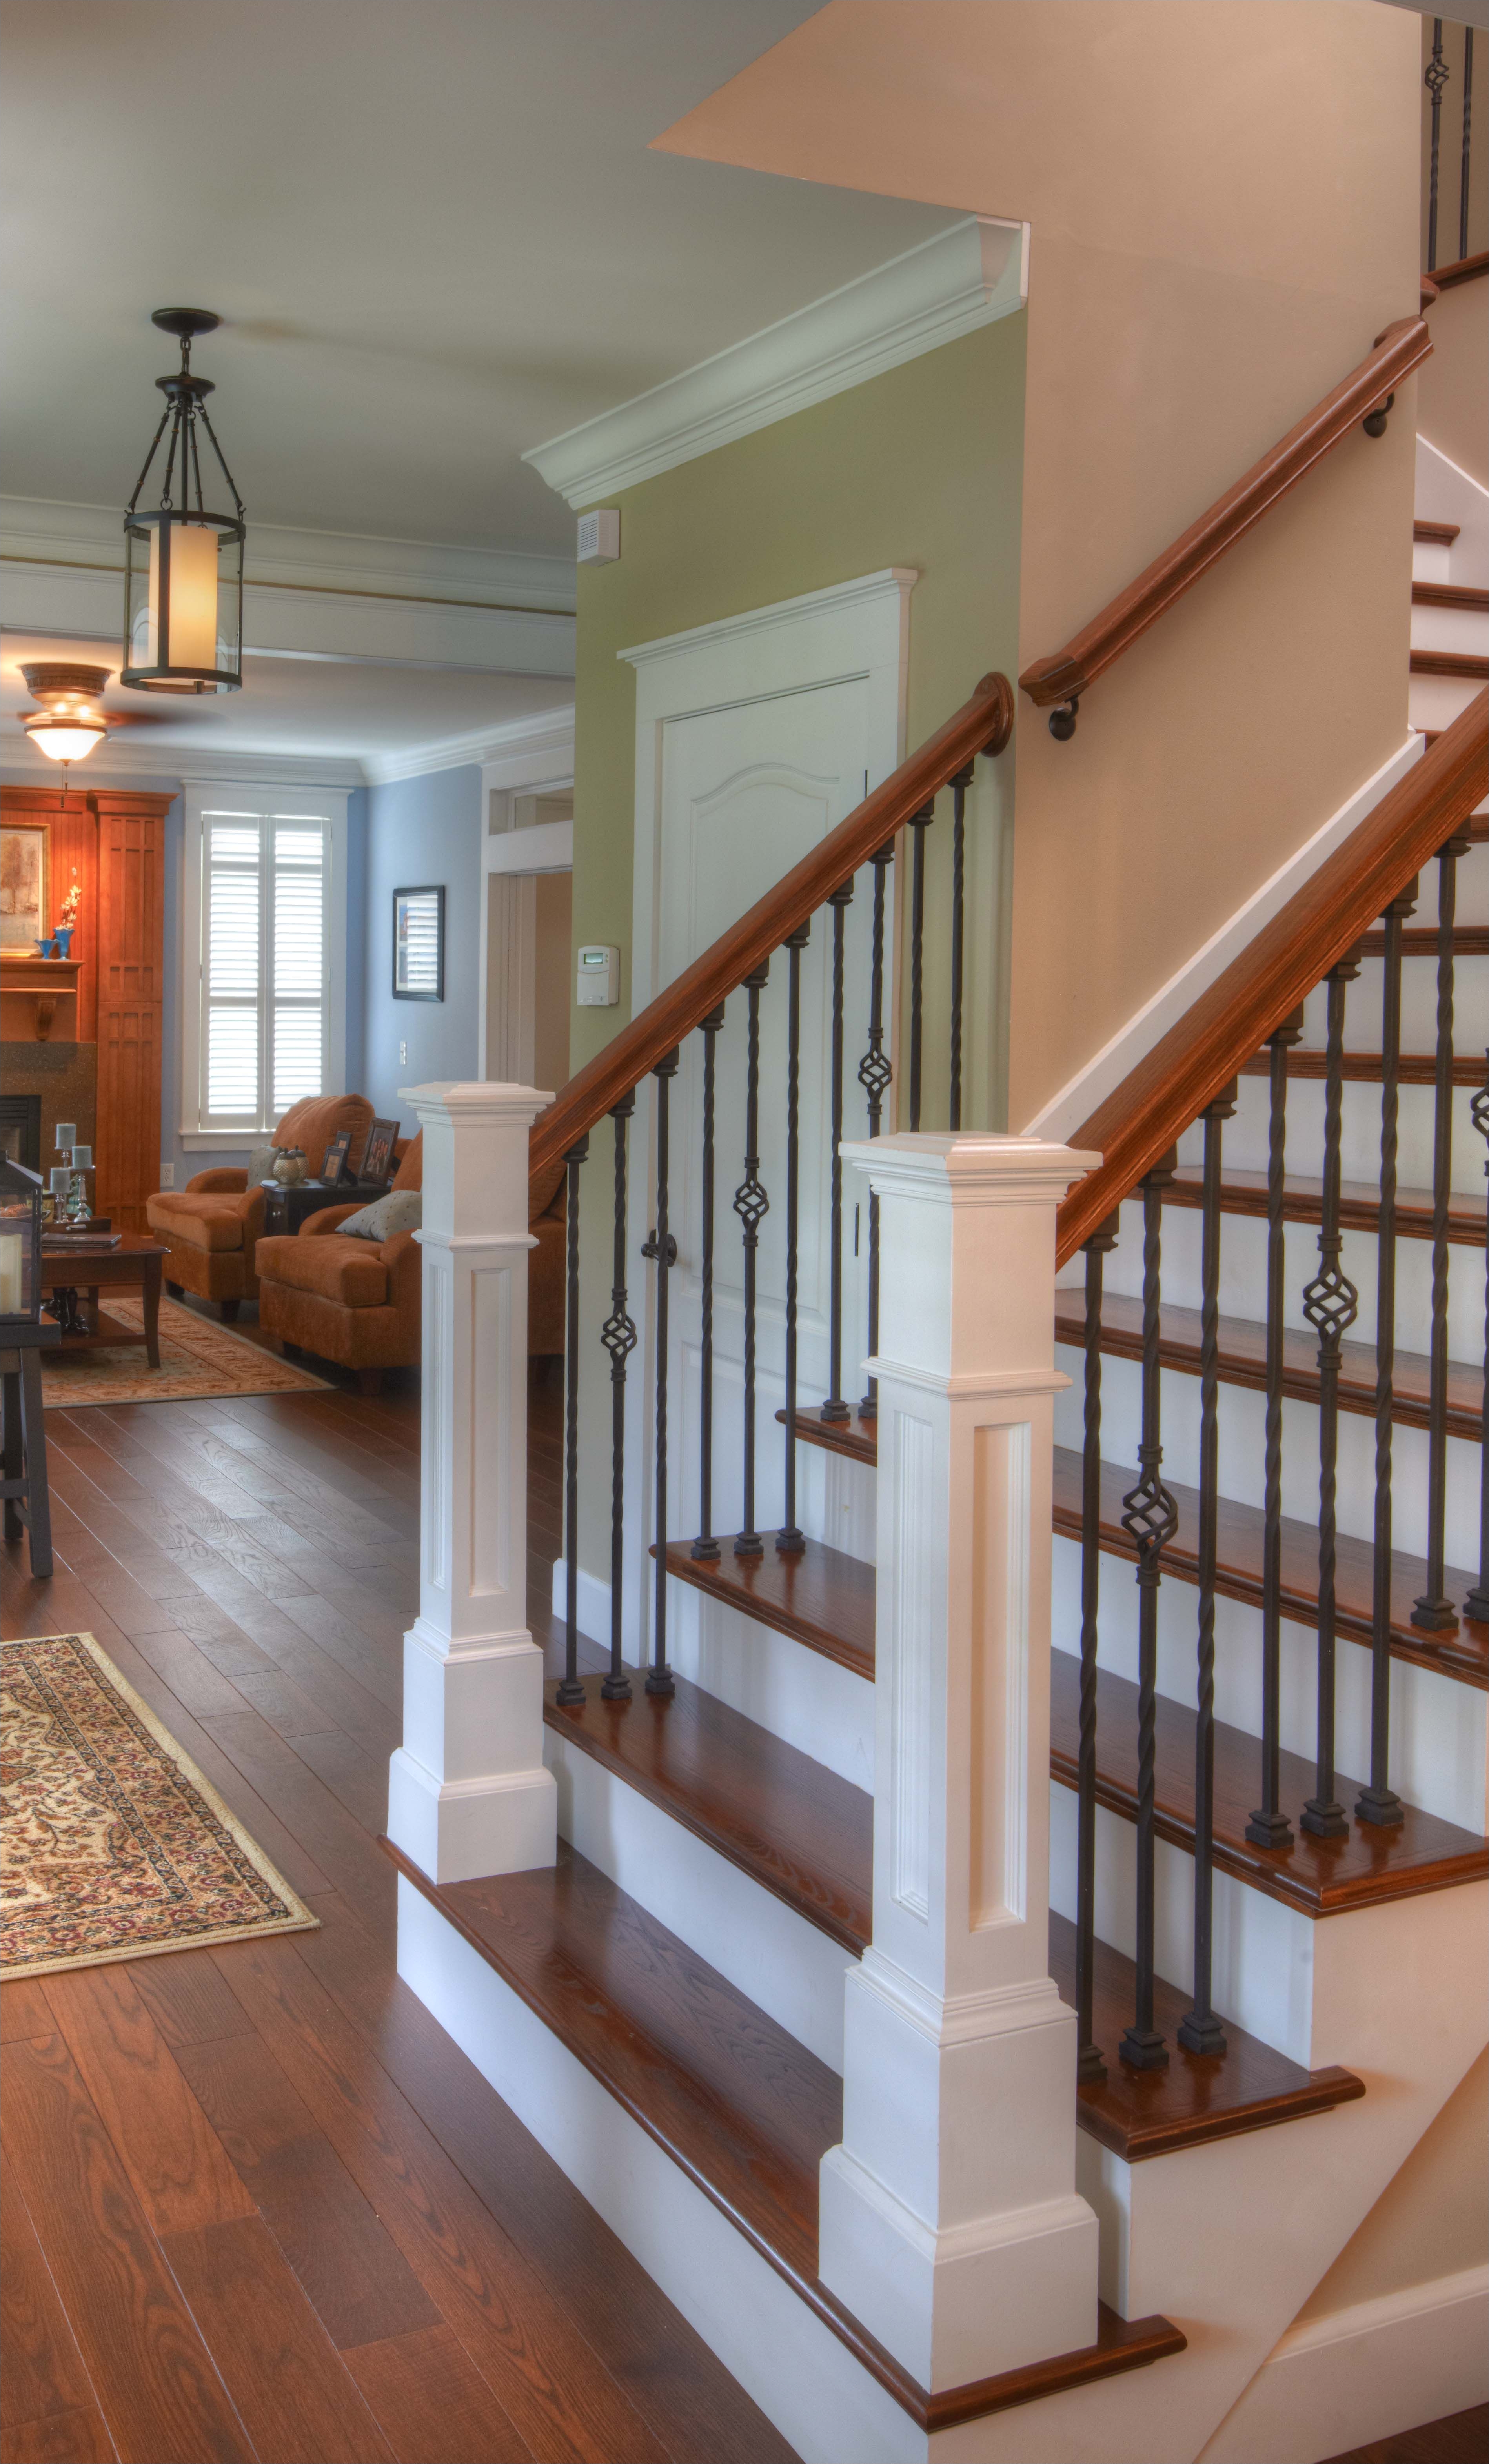 hardwood flooring up the stairs classic look rod iron balusters wood railings and white posts